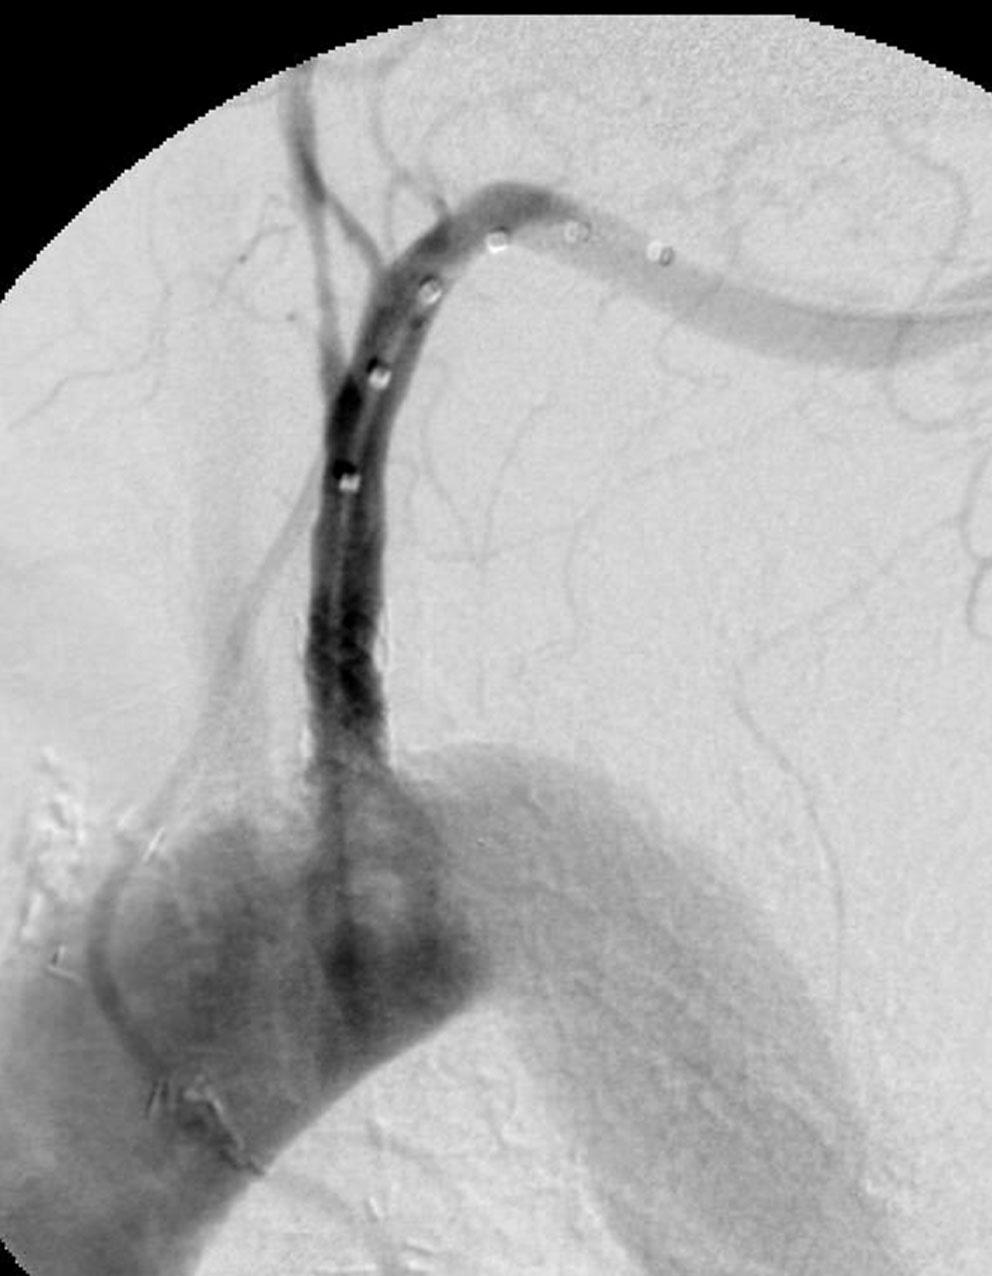 . rteriogram shows in-stent stenosis in the proximal left subclavian artery (arrow).